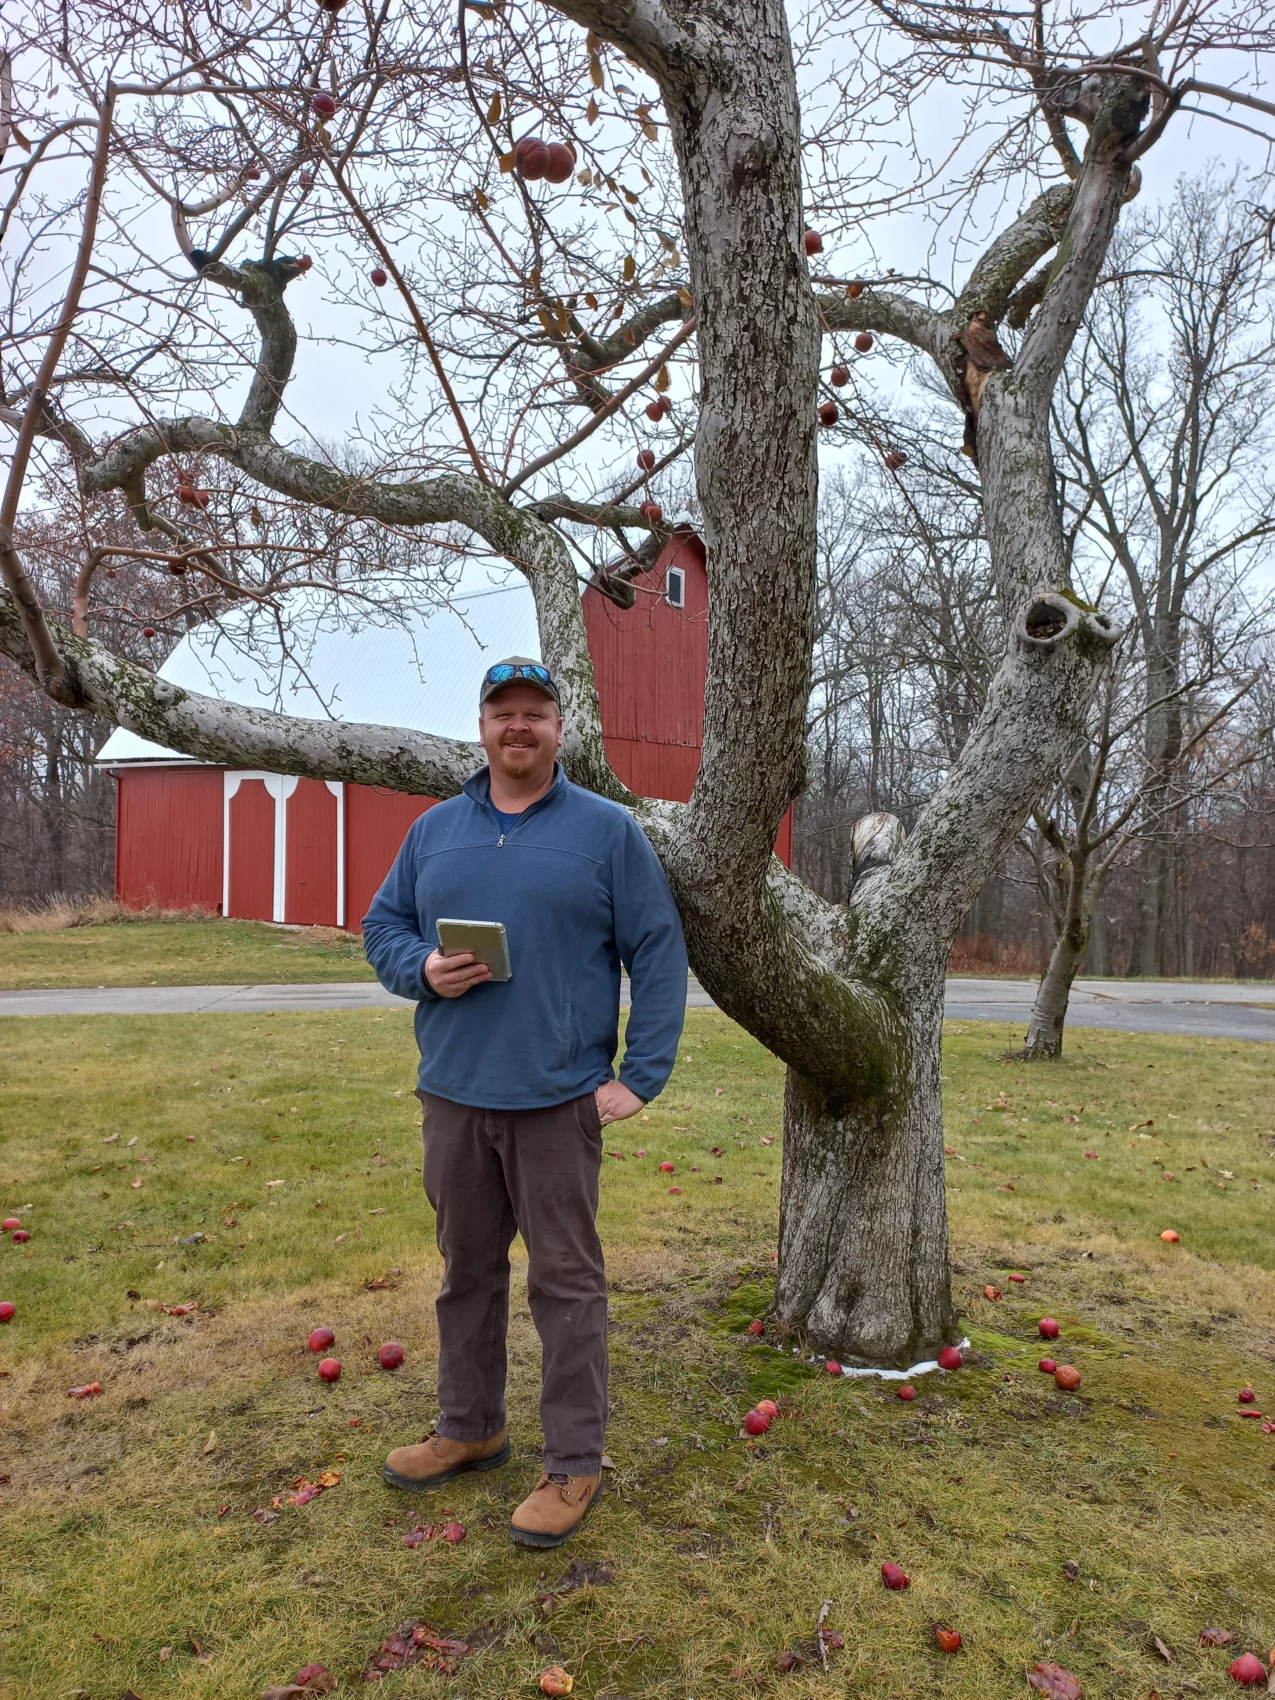 Man stands under an apple tree with a barn in the background.